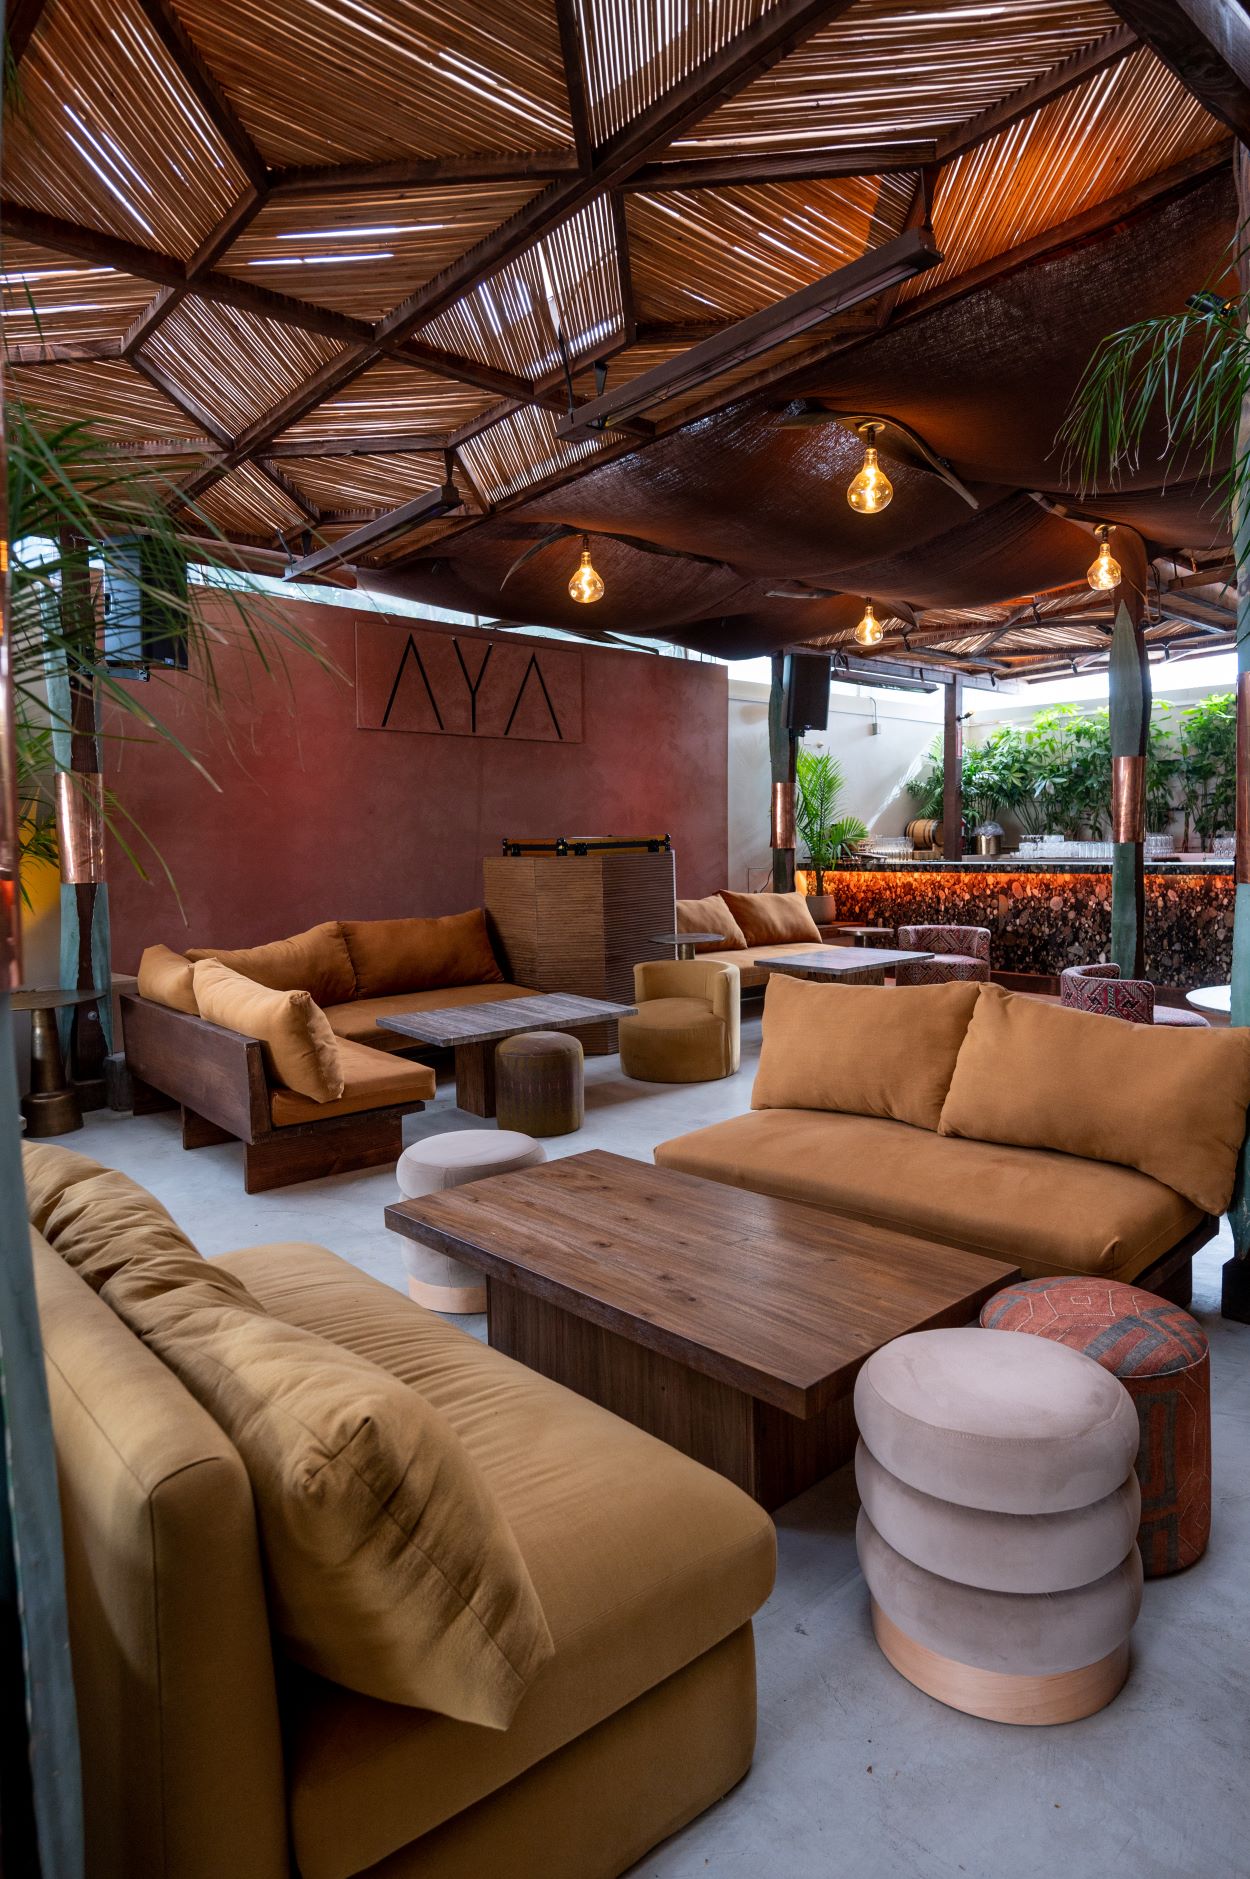 An image of AYA. With outdoor furniture, plants, and the signage.